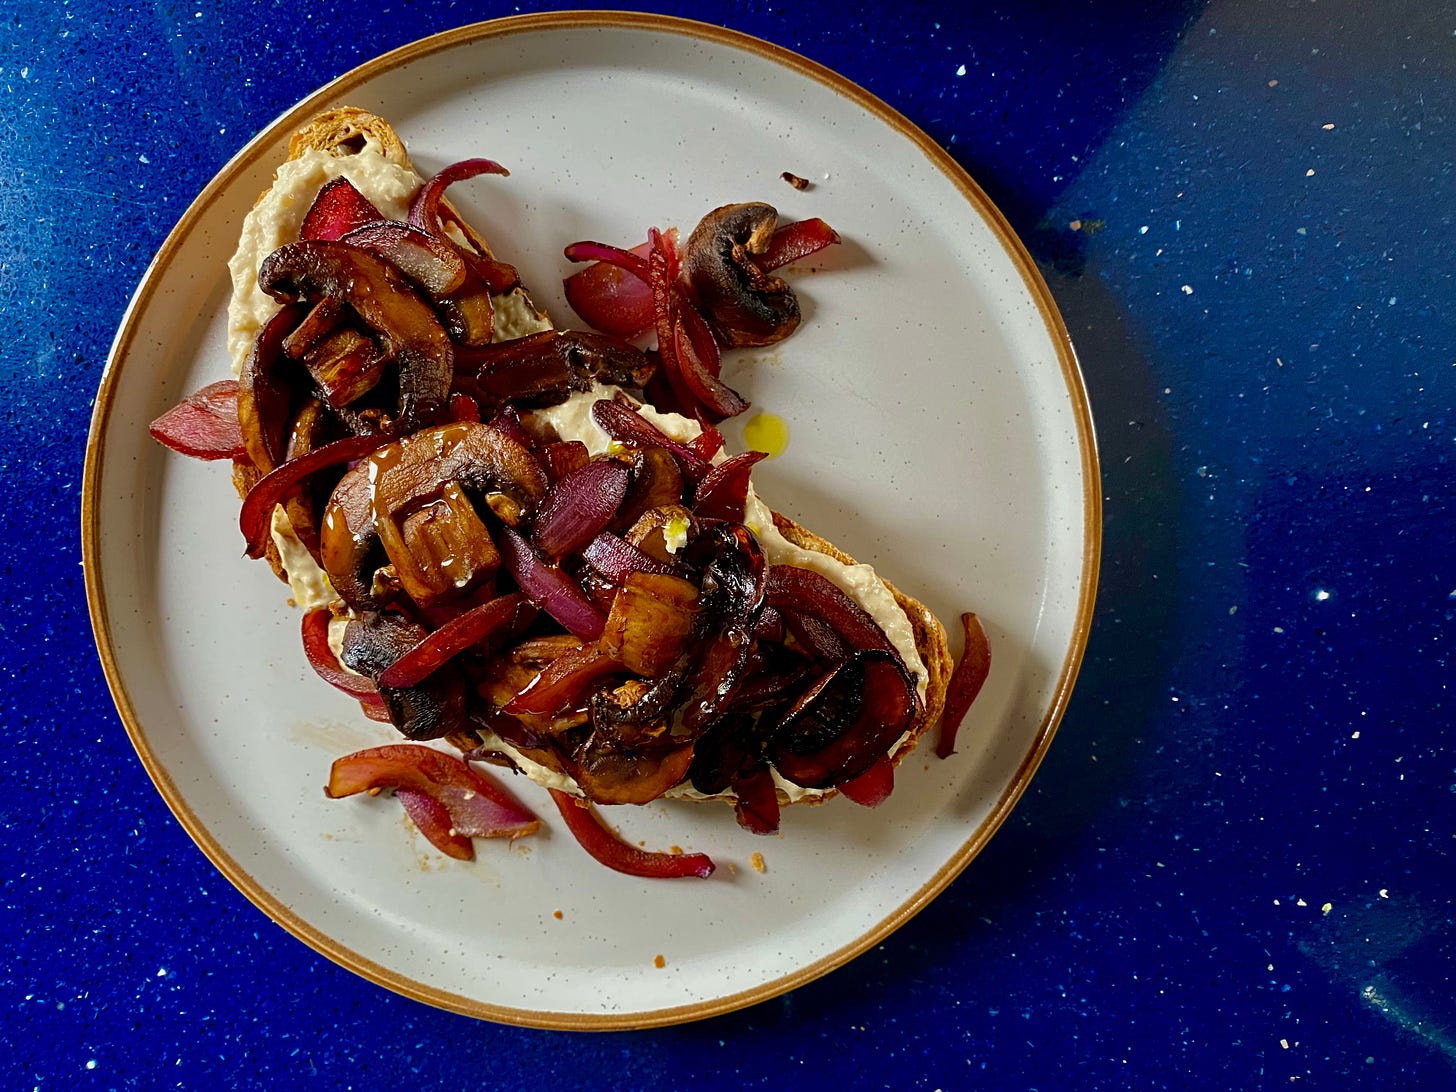 Piece of toast topped with a creamy beige coloured spread, with pieces of red onion and sliced mushrooms scattered over the top. The food is served on a round plate placed on a blue countertop